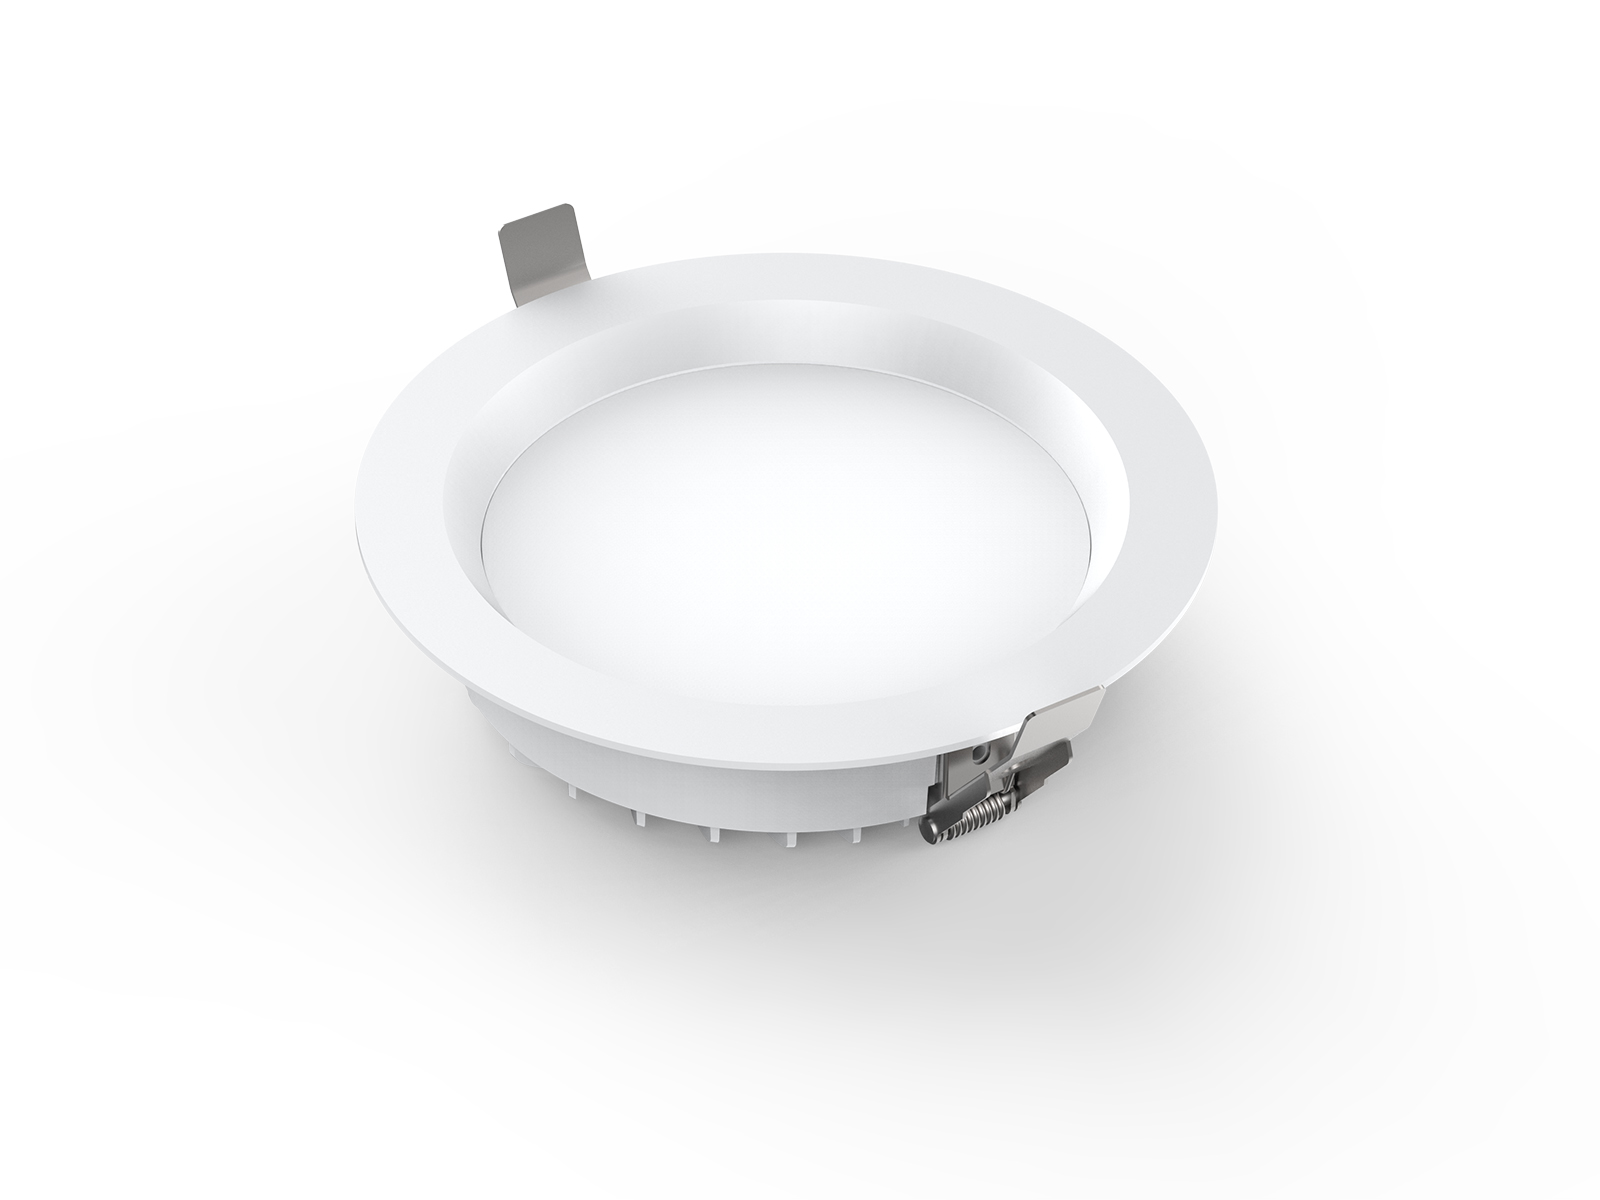 170mm dimmable led downlight